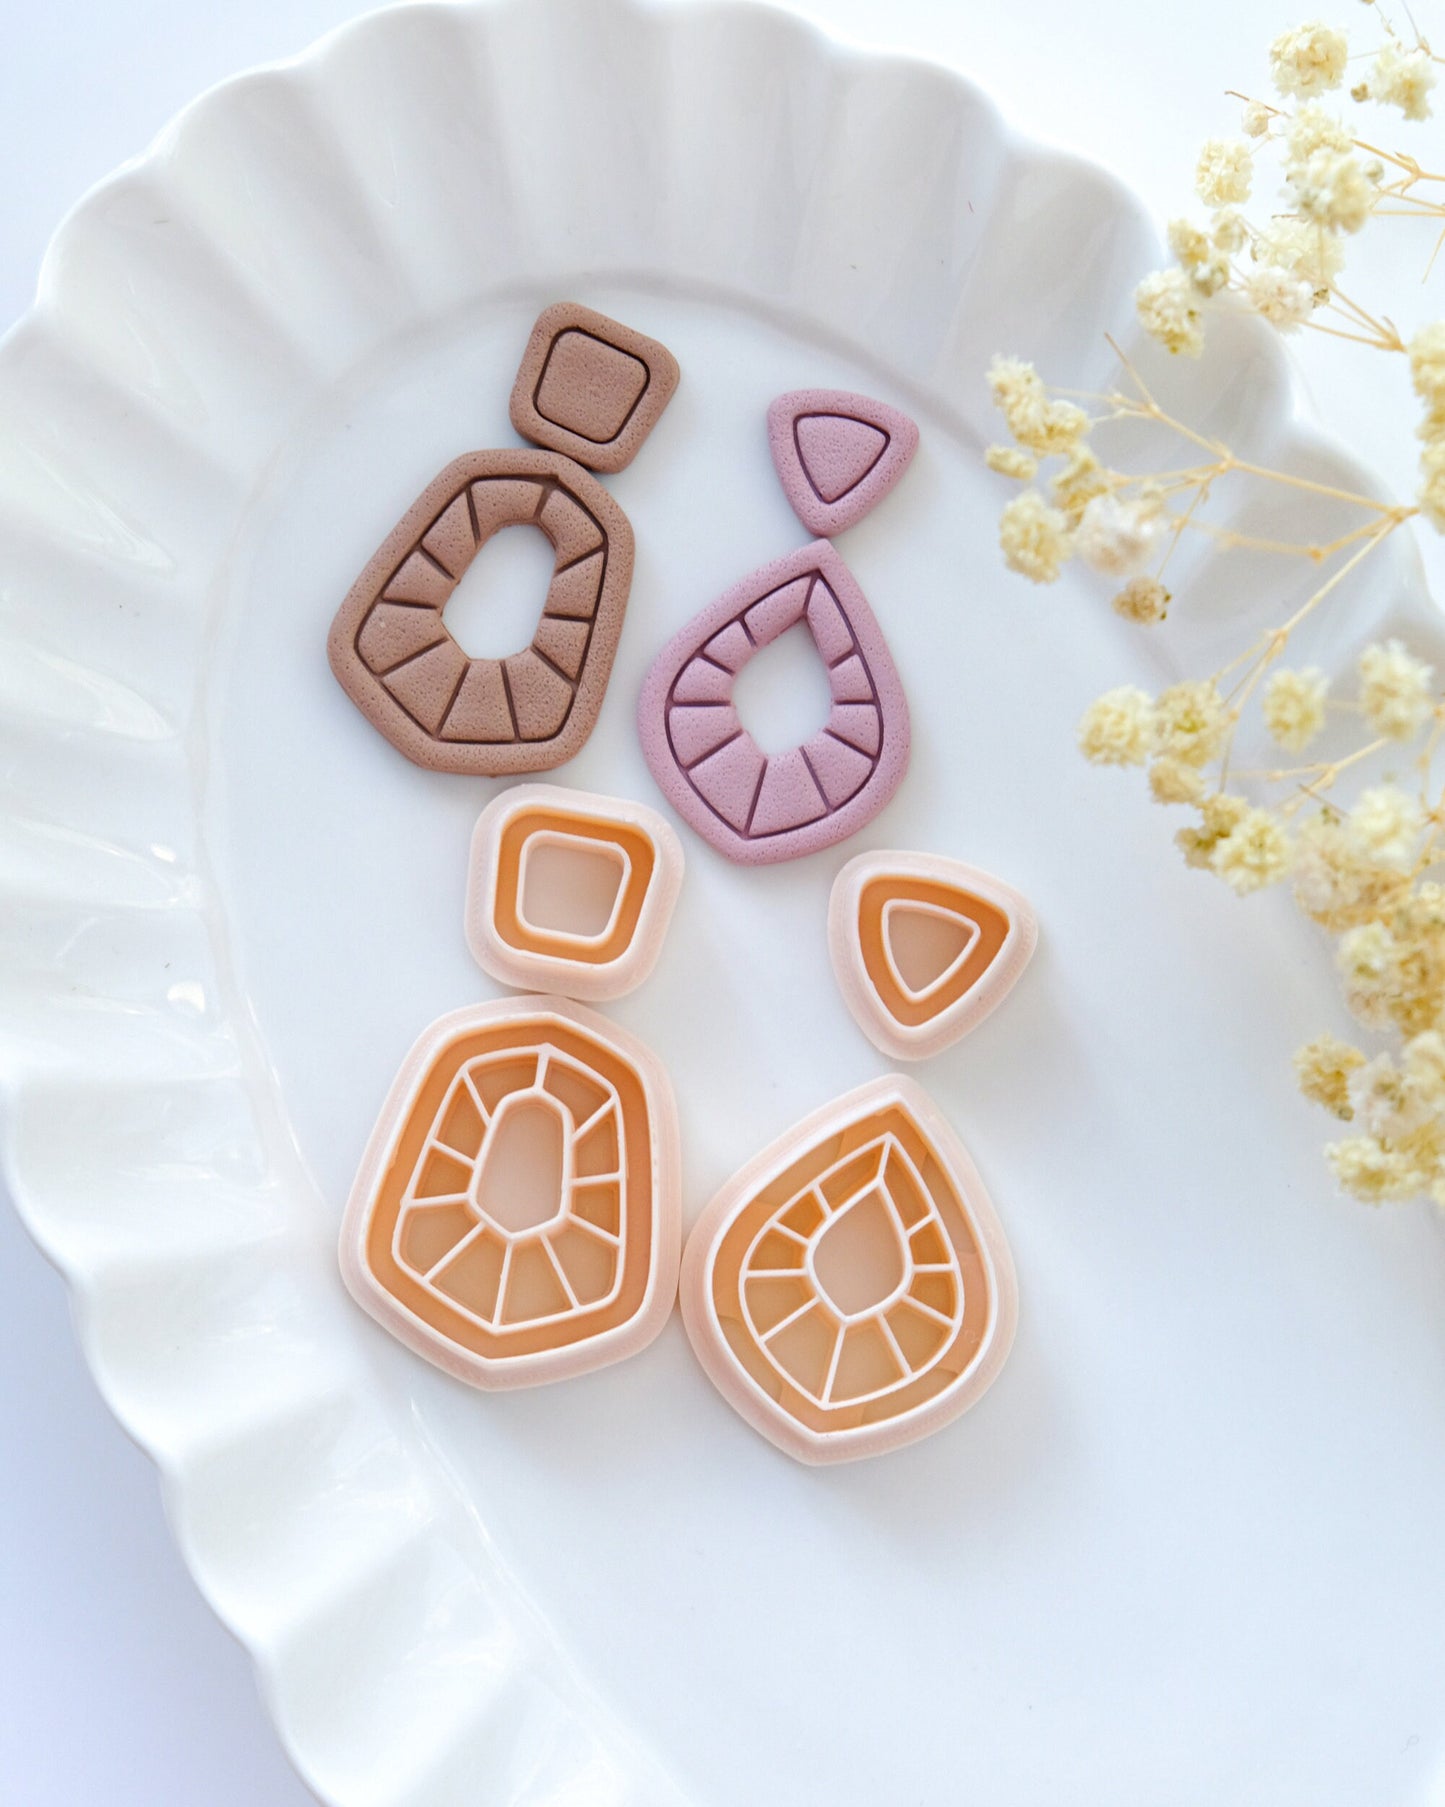 Cutout Dangle Clay Cutters Set | Art Deco Polymer Clay Earring Cutters